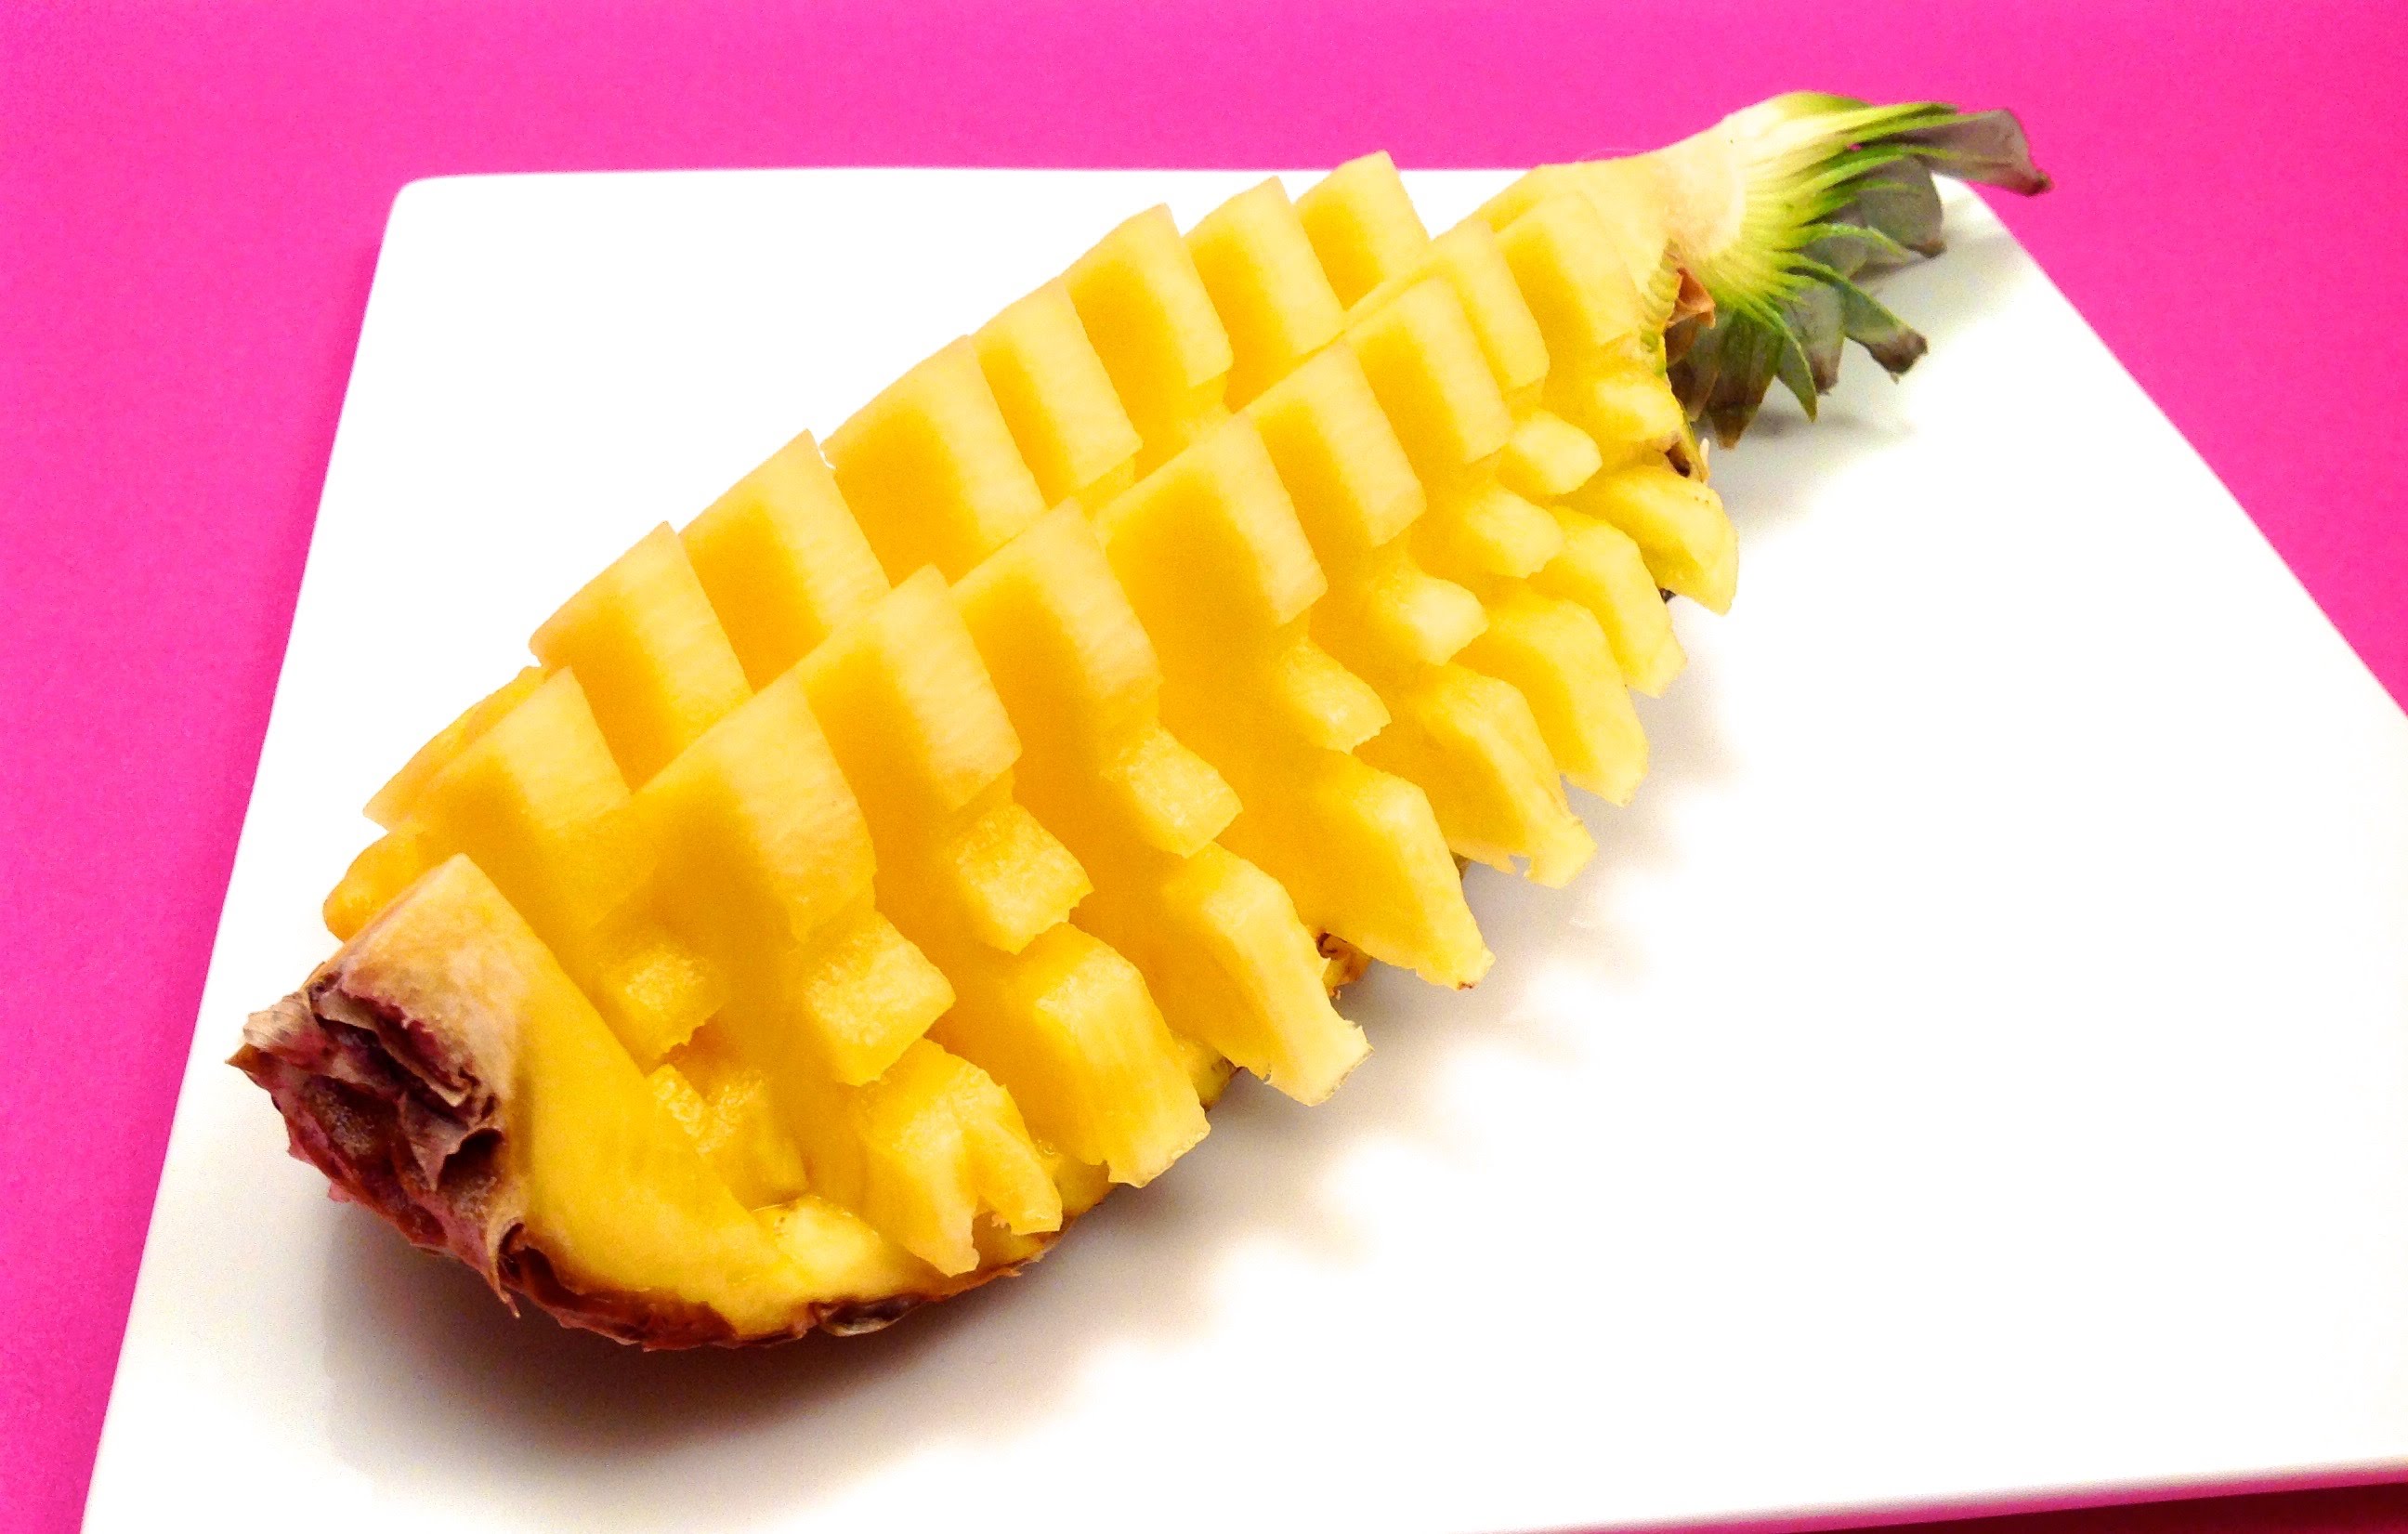 How to Quickly Cut and Serve a Pineapple / Tips, Tricks, Party Ideas ...